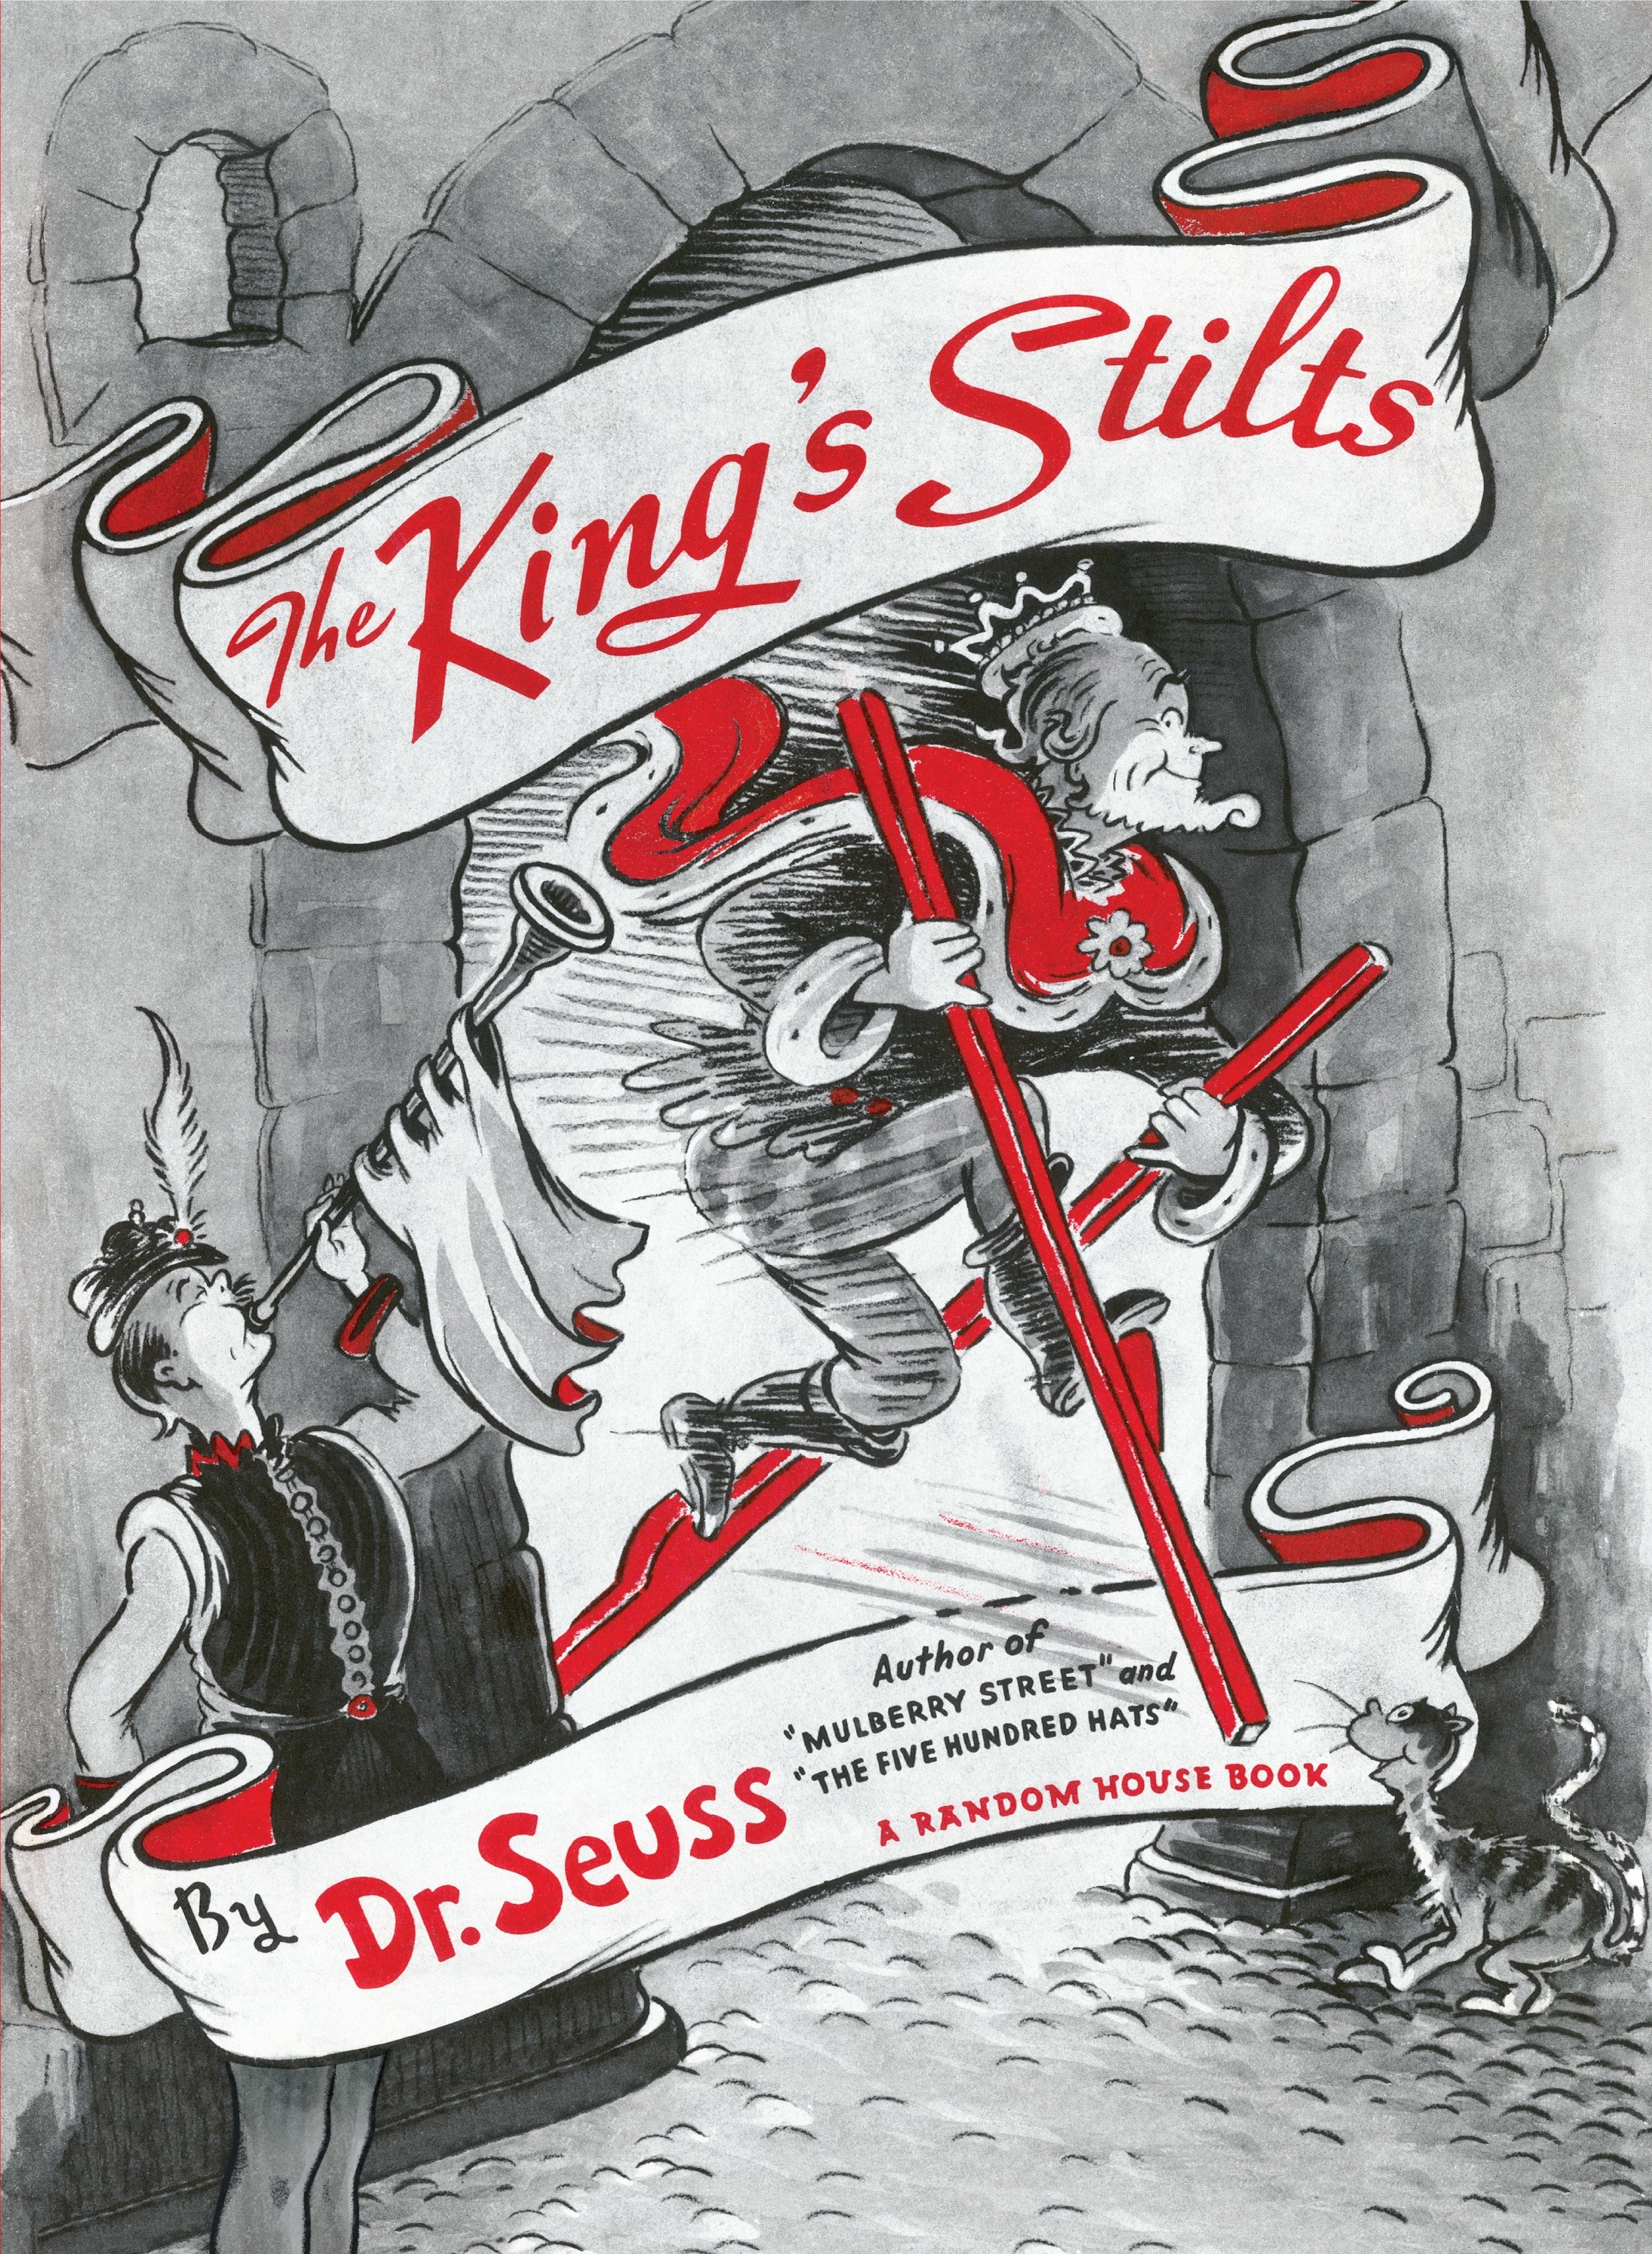 The King'S Stilts (Hardcover Book)